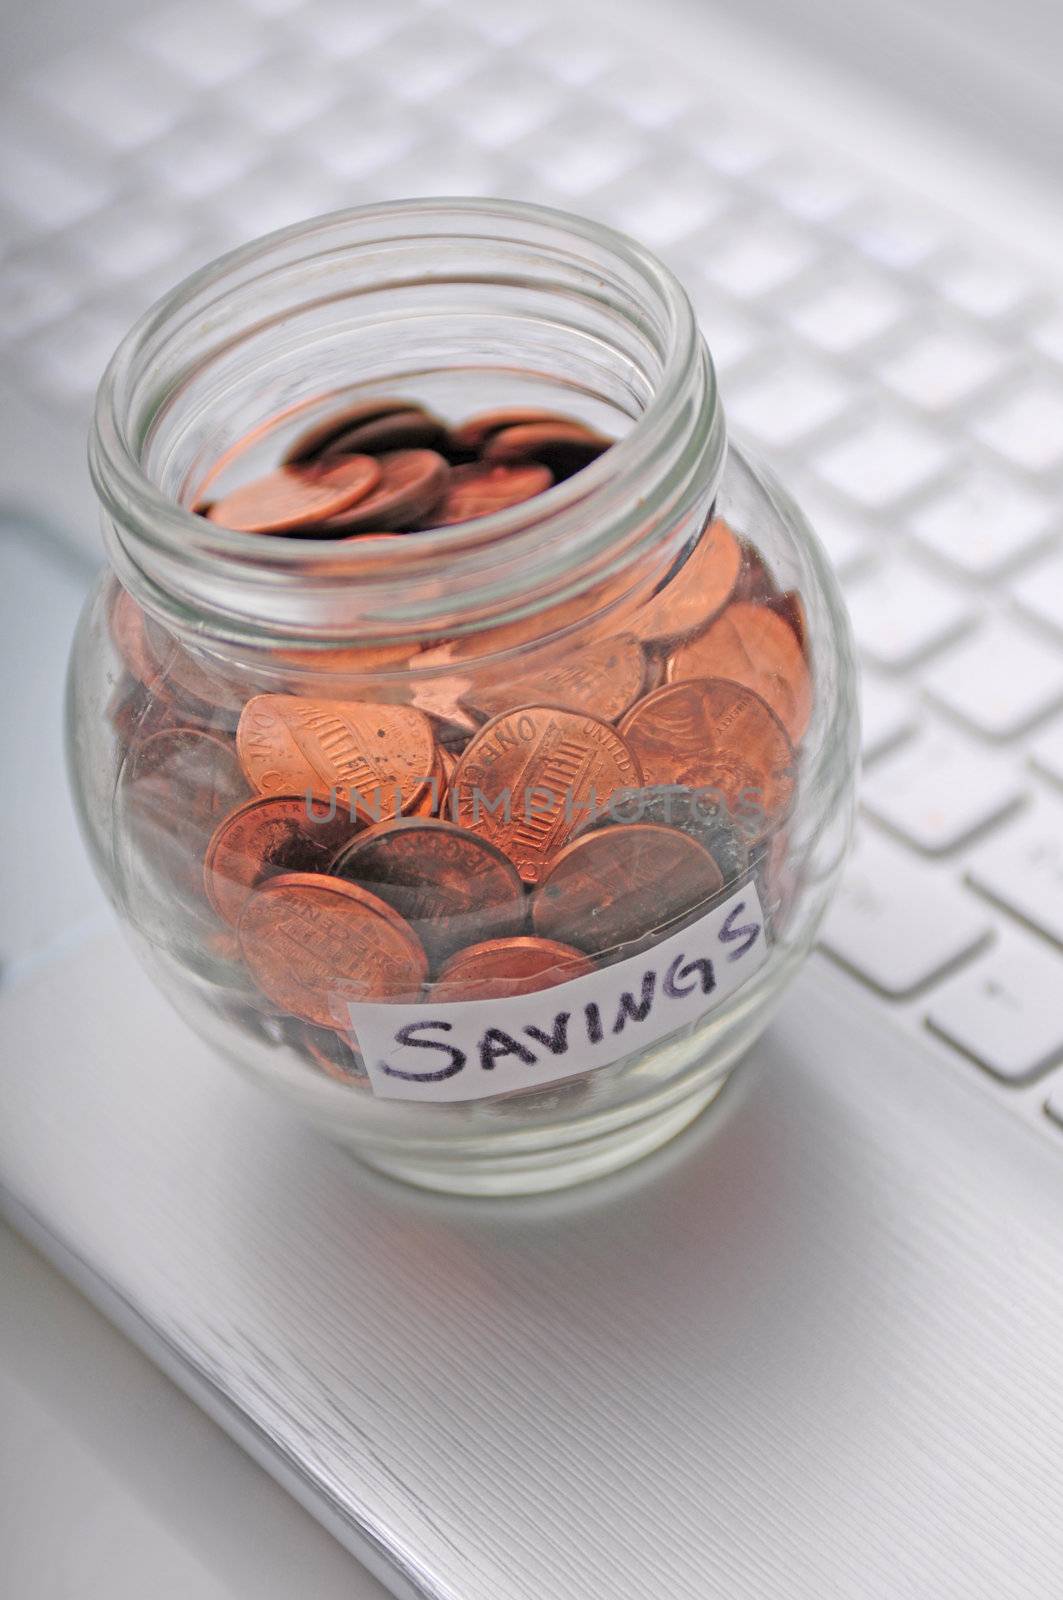 a concept of working a lot to save a little bit of money which is signified by a computer keyboard and pennies in a jar